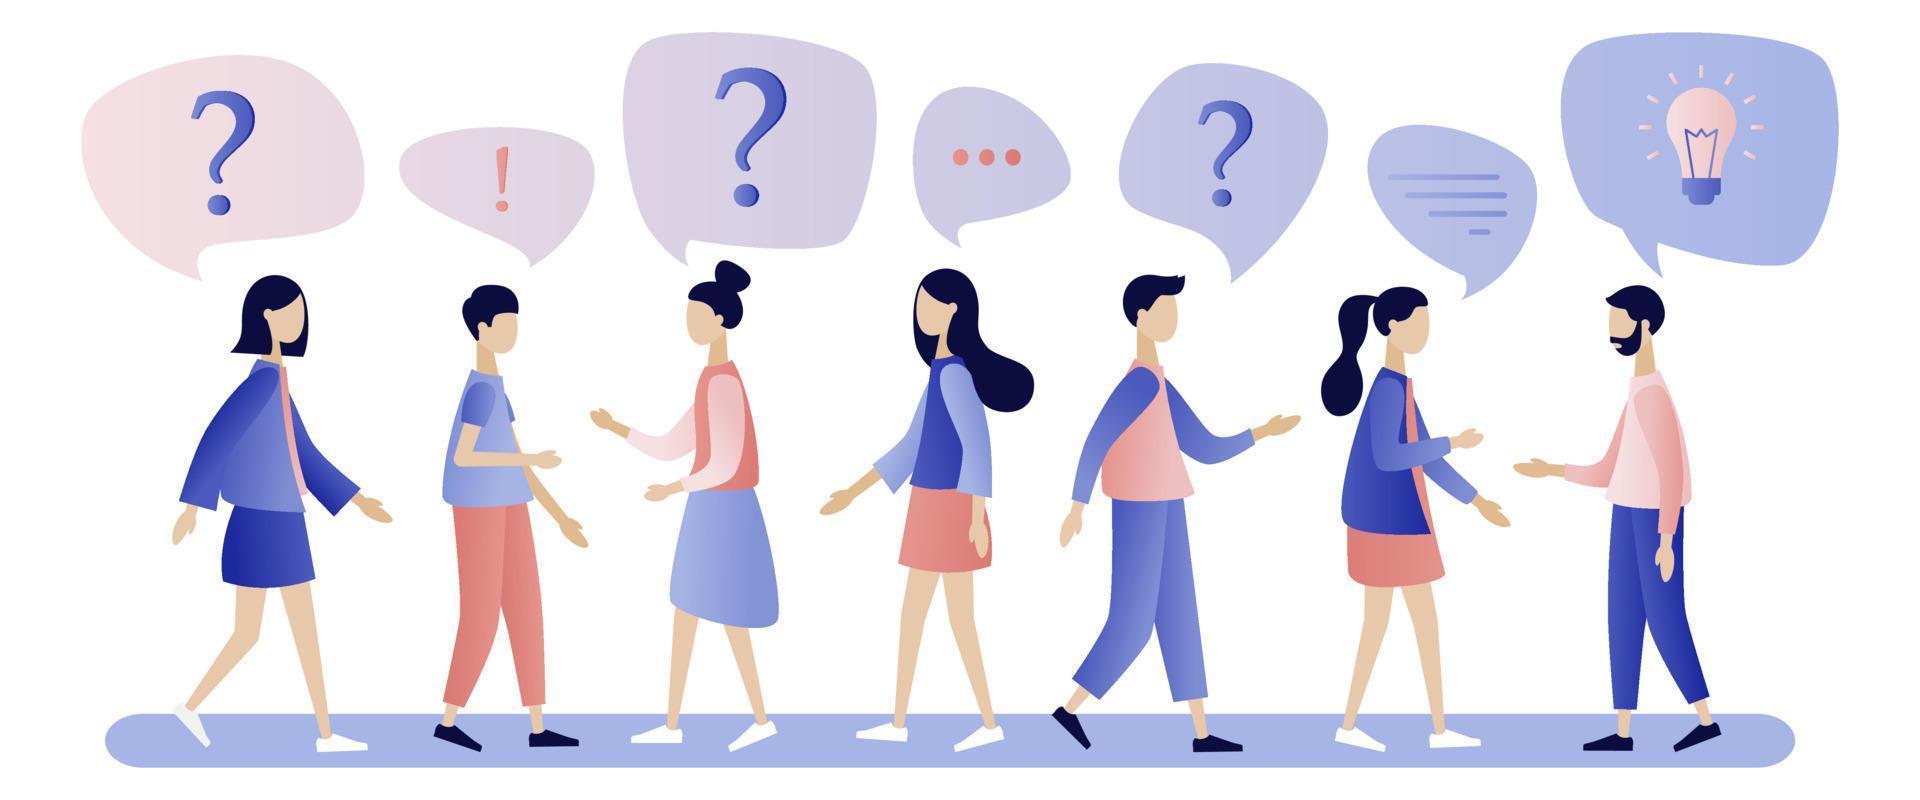 People around exclamation and question marks. People communication in search of ideas, problem solving. Question answer metaphor. Modern flat cartoon style. Vector illustration